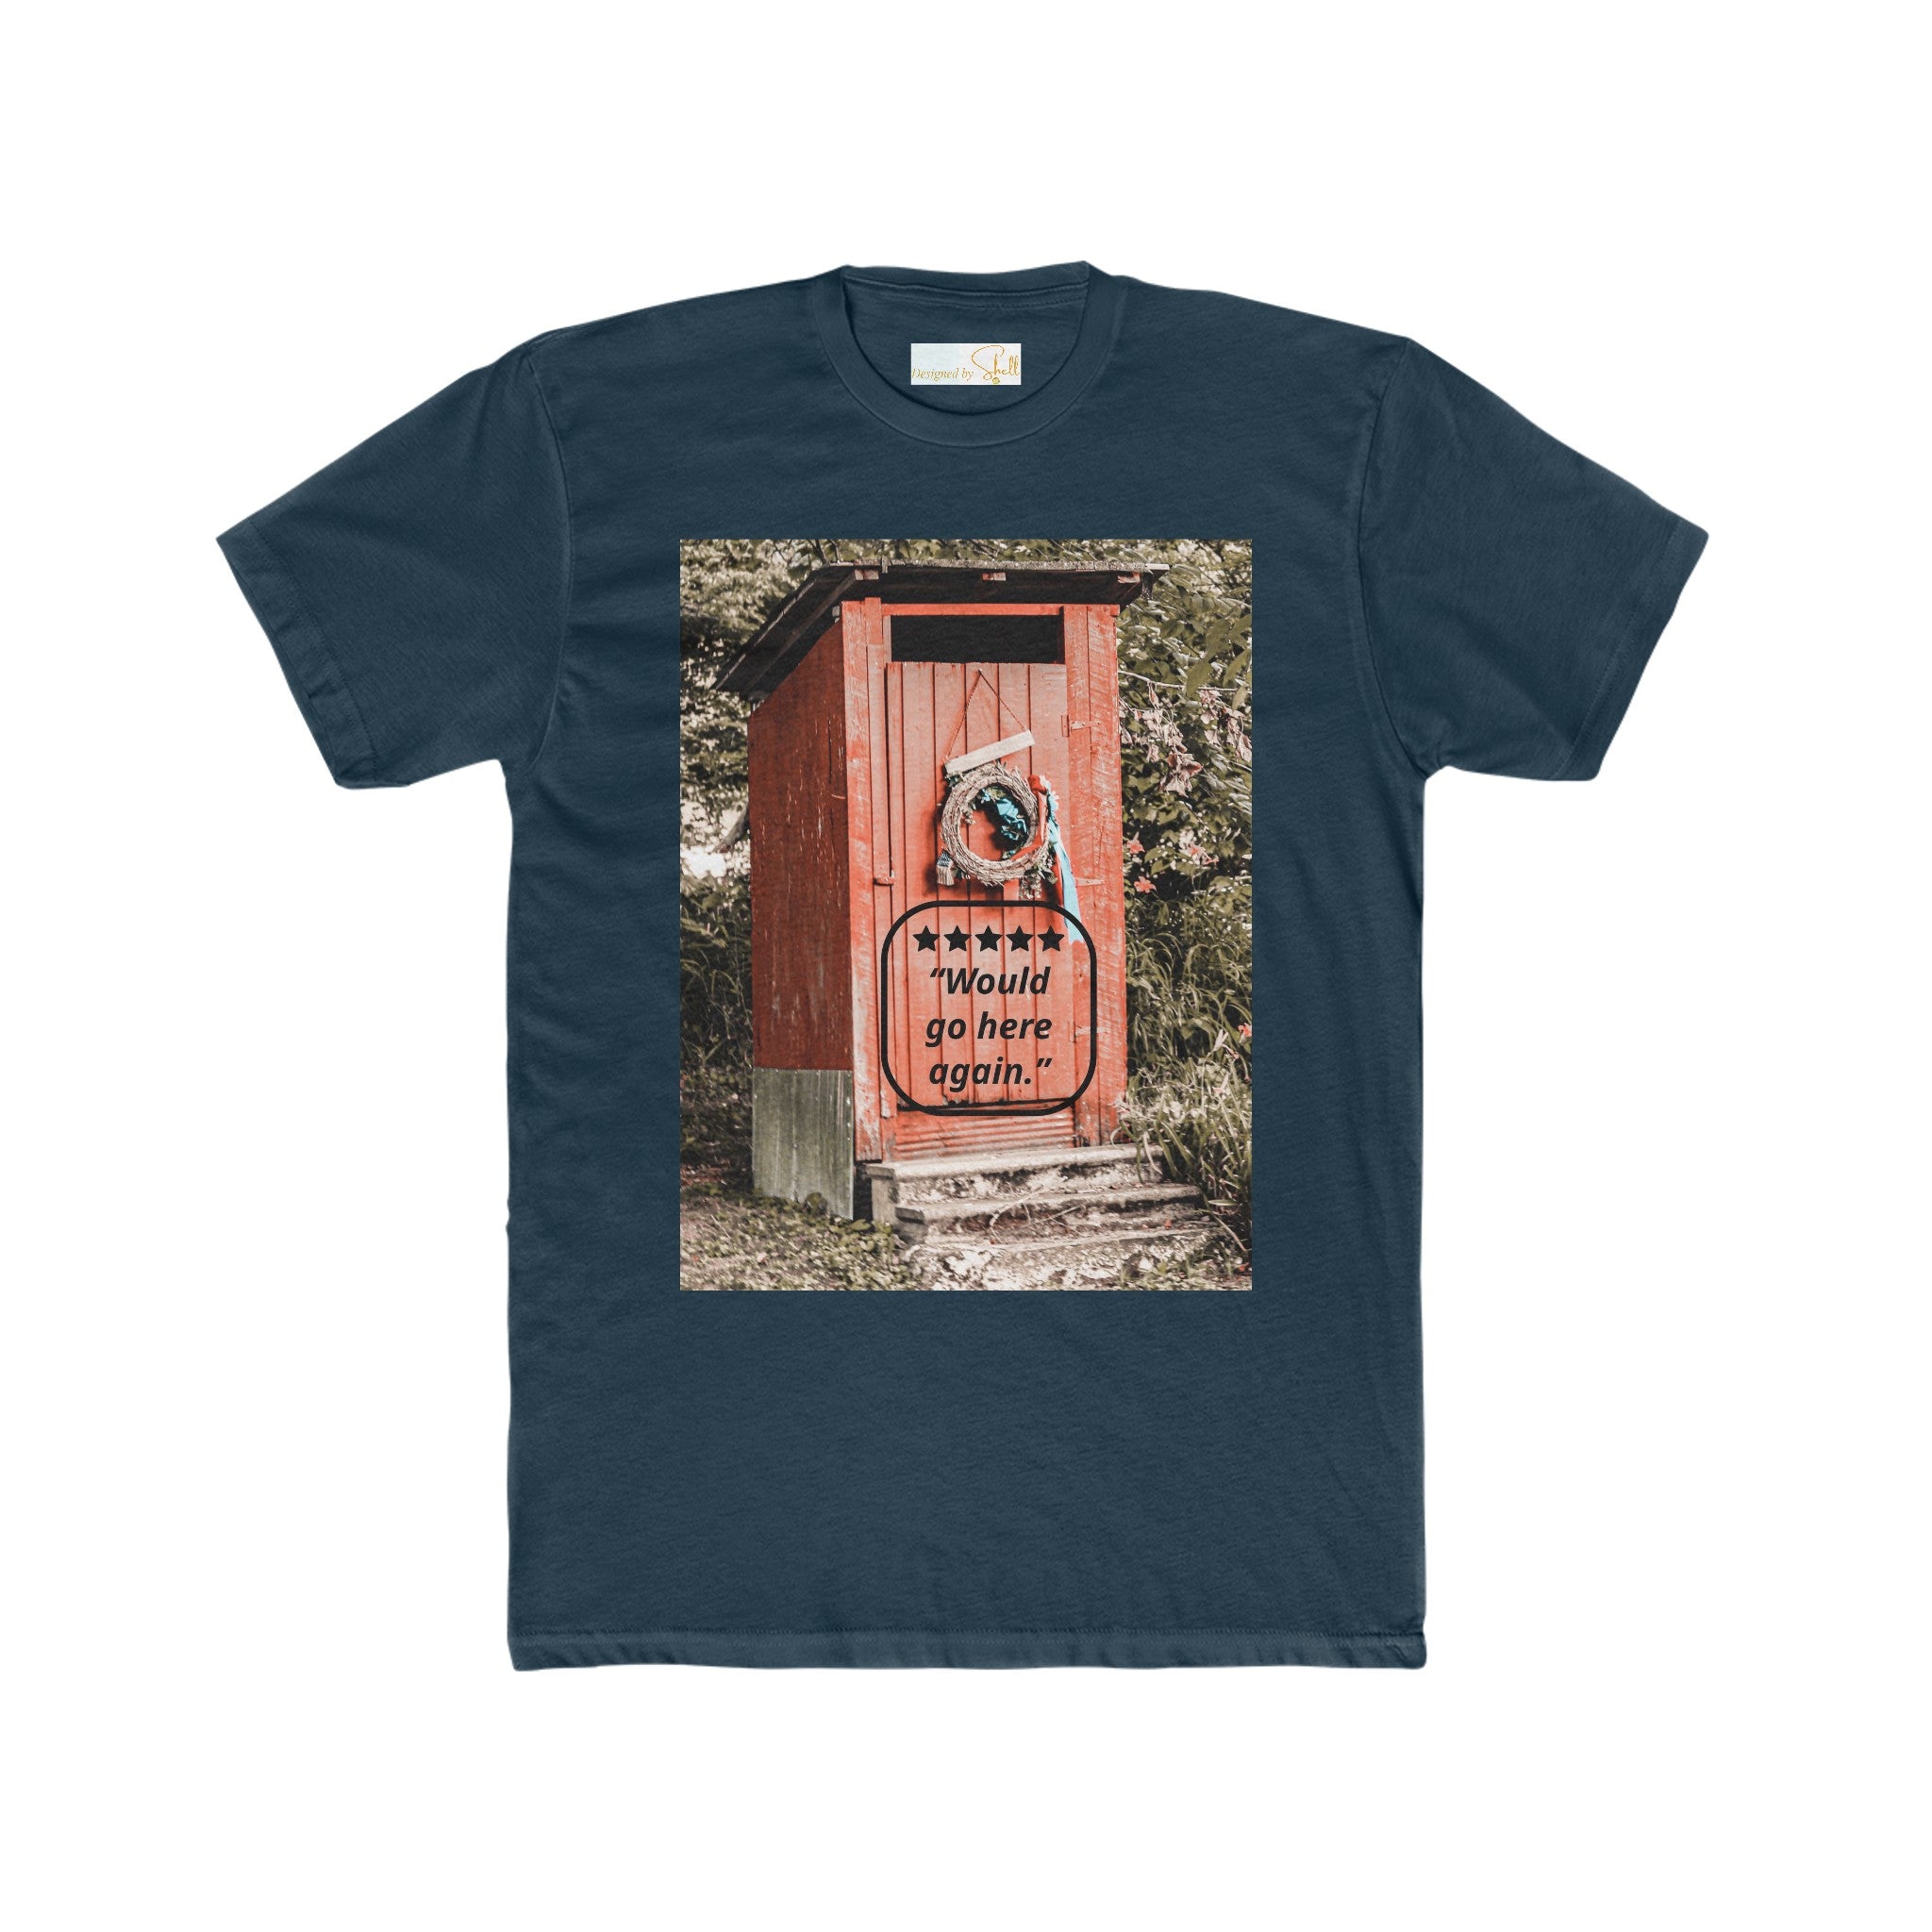 Men's Funny Outhouse with 5-star Rating Cotton T-shirt up to 5XL